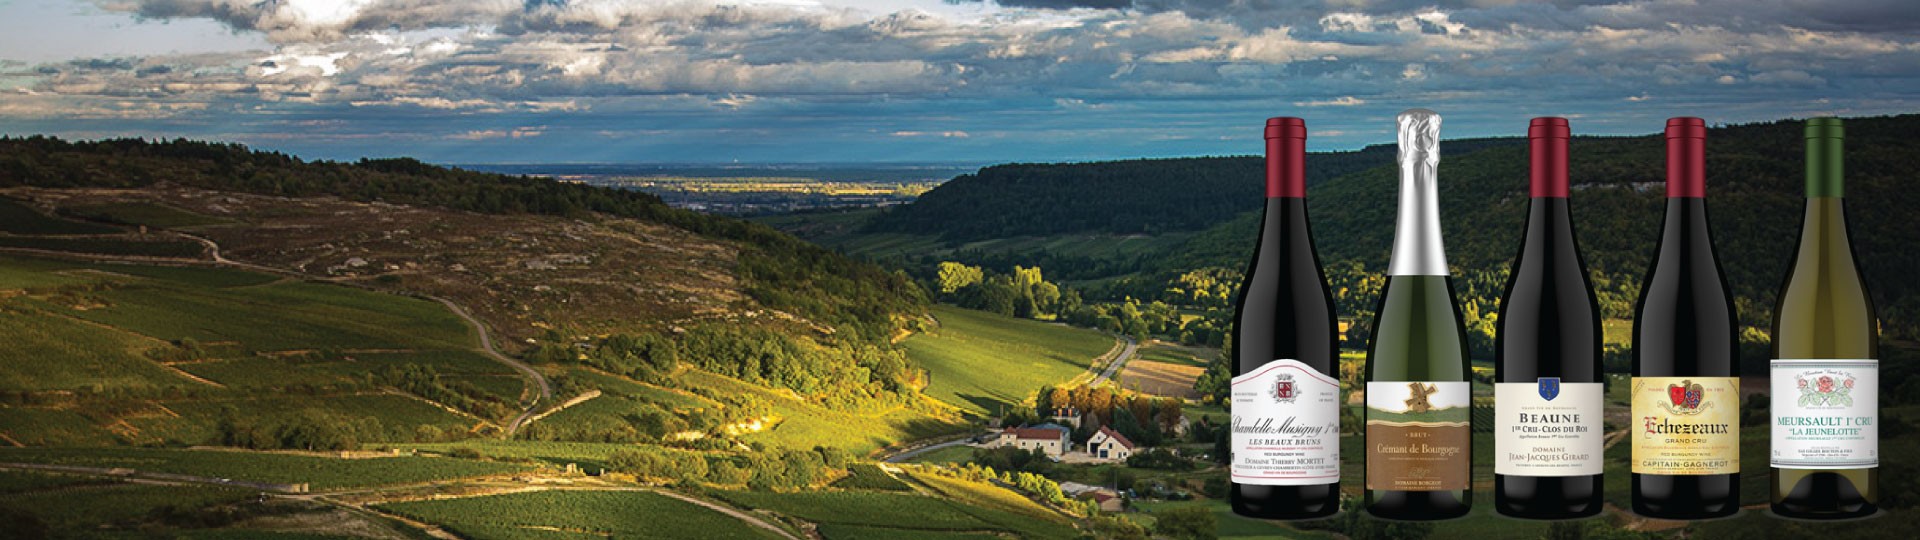 5 Burgundy wines are superimposed over a small winemaking village in Burgundy, France